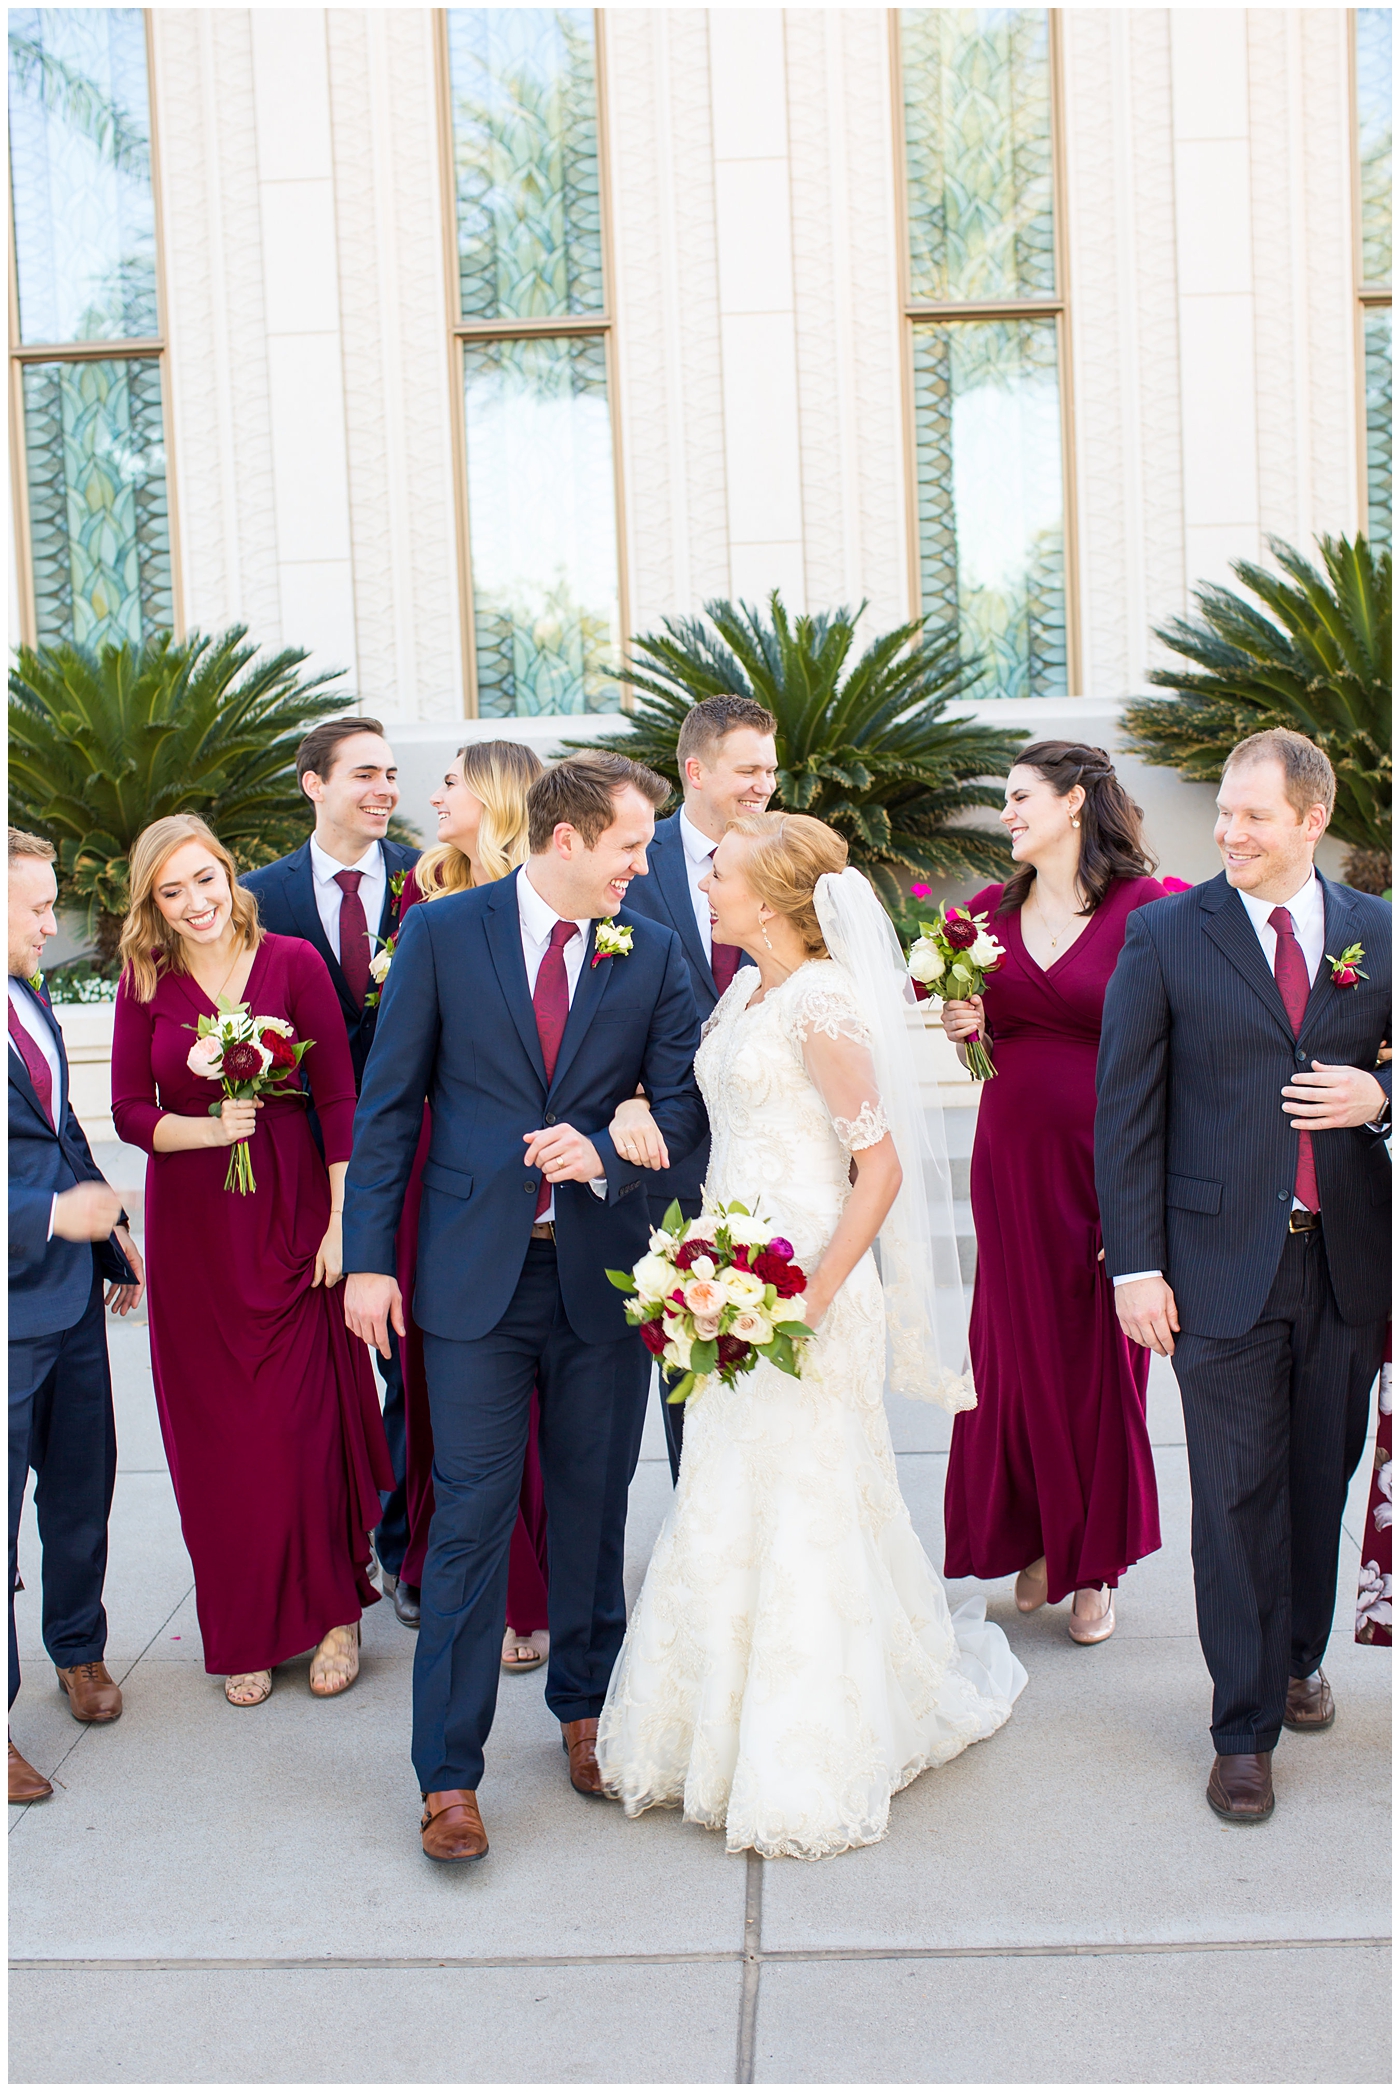 bride in sleeved lace dress with burgundy, white, and green wedding bouquet with bridesmaids in long sleeve burgundy dresses and groom in navy suit with burgundy tie with groomsmen wedding party portrait at Gilbert LDS temple